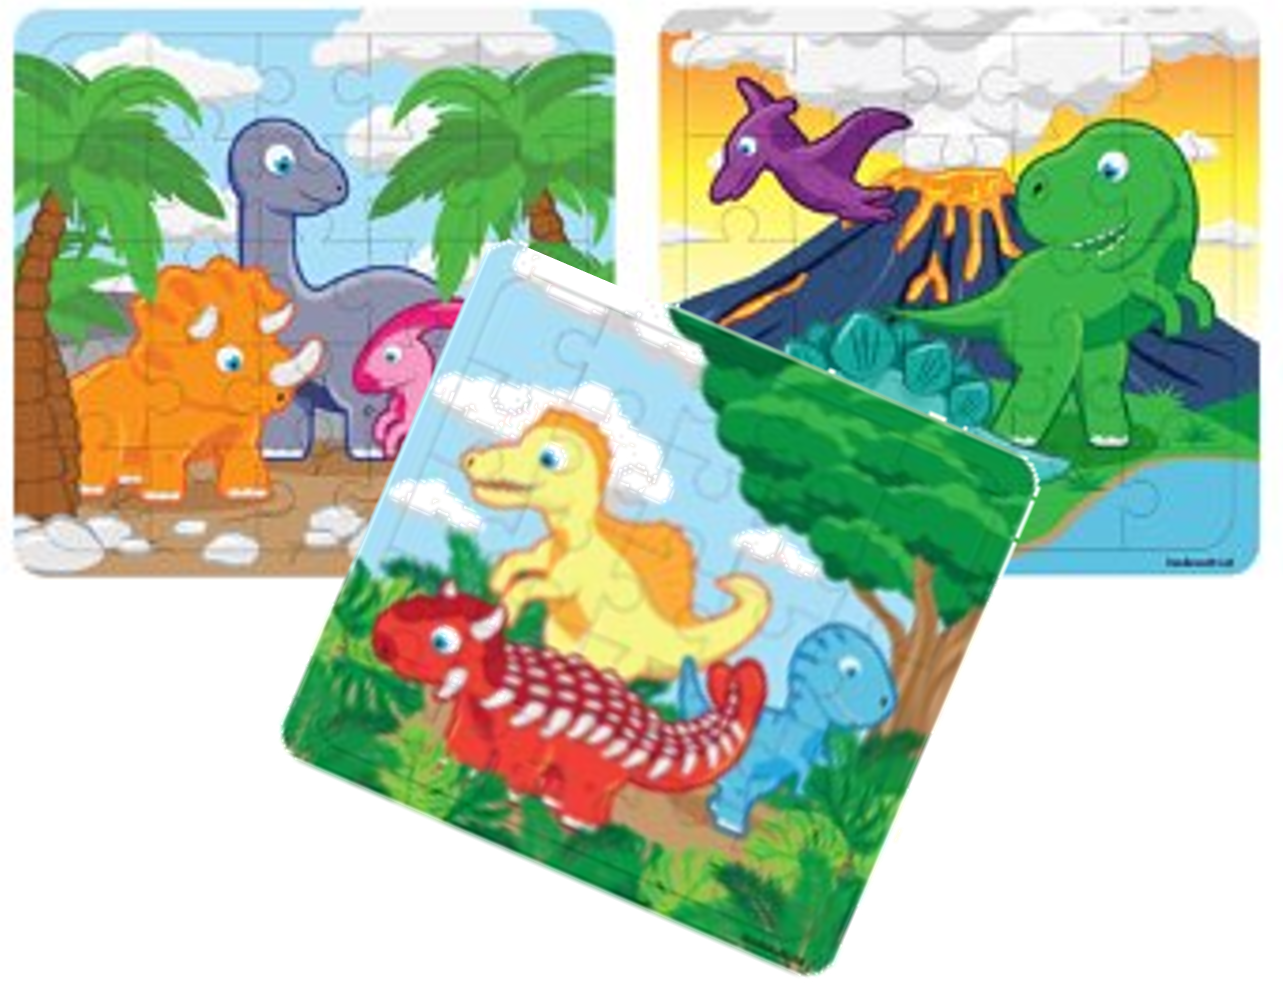 Dinosaur Party Bag - Pre Filled Dinosaur Loot Bag and Toys - Goodie Bag A